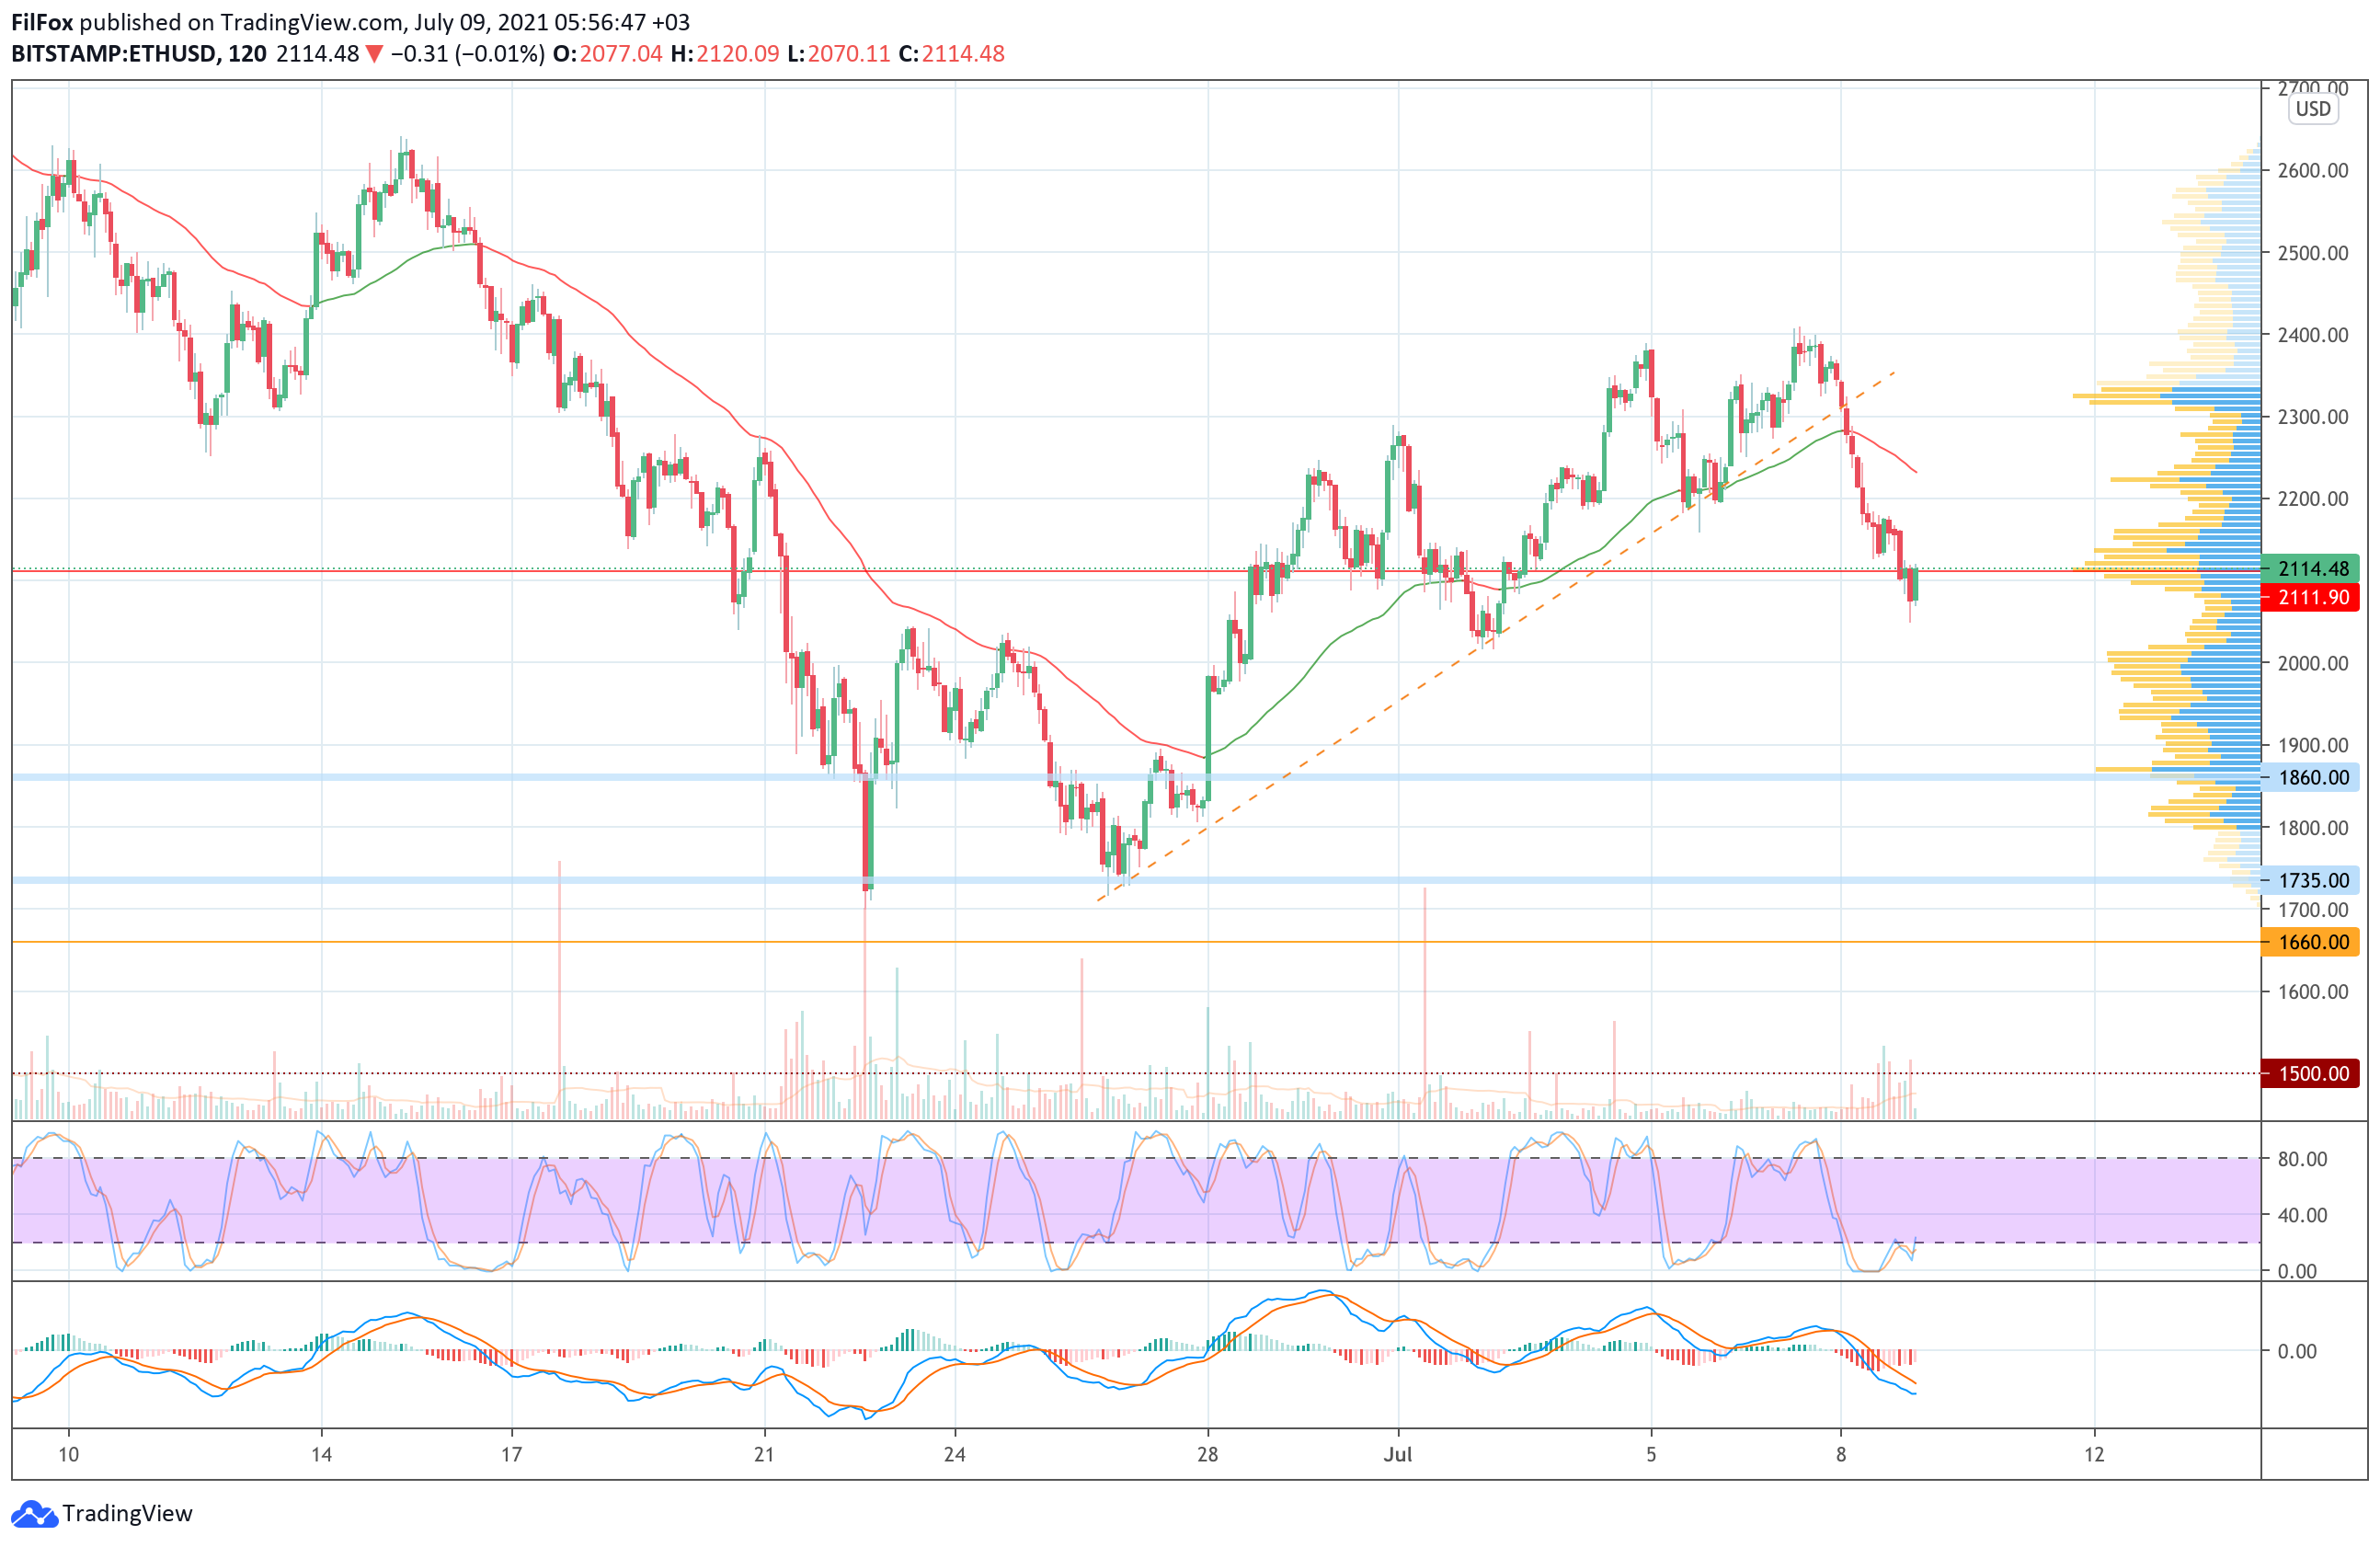 Analysis of the prices of Bitcoin, Ethereum, XRP for 07/09/2021